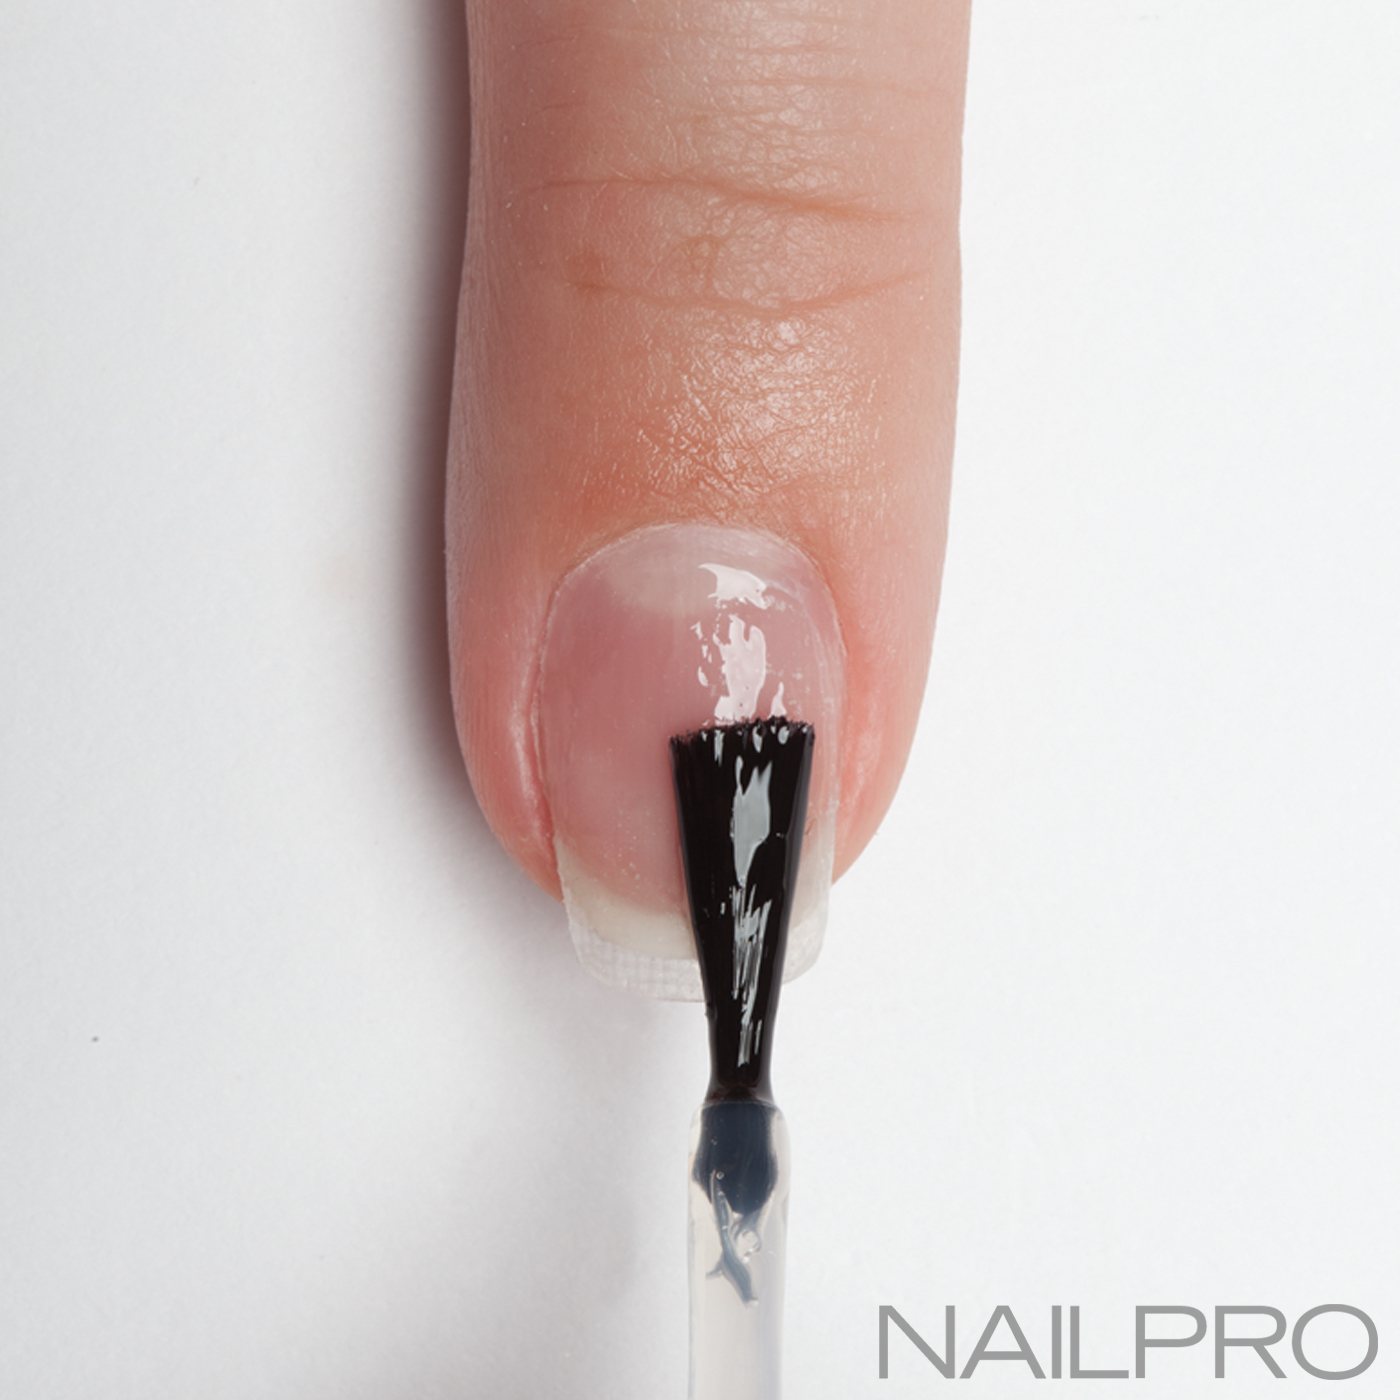 The Nail Extension